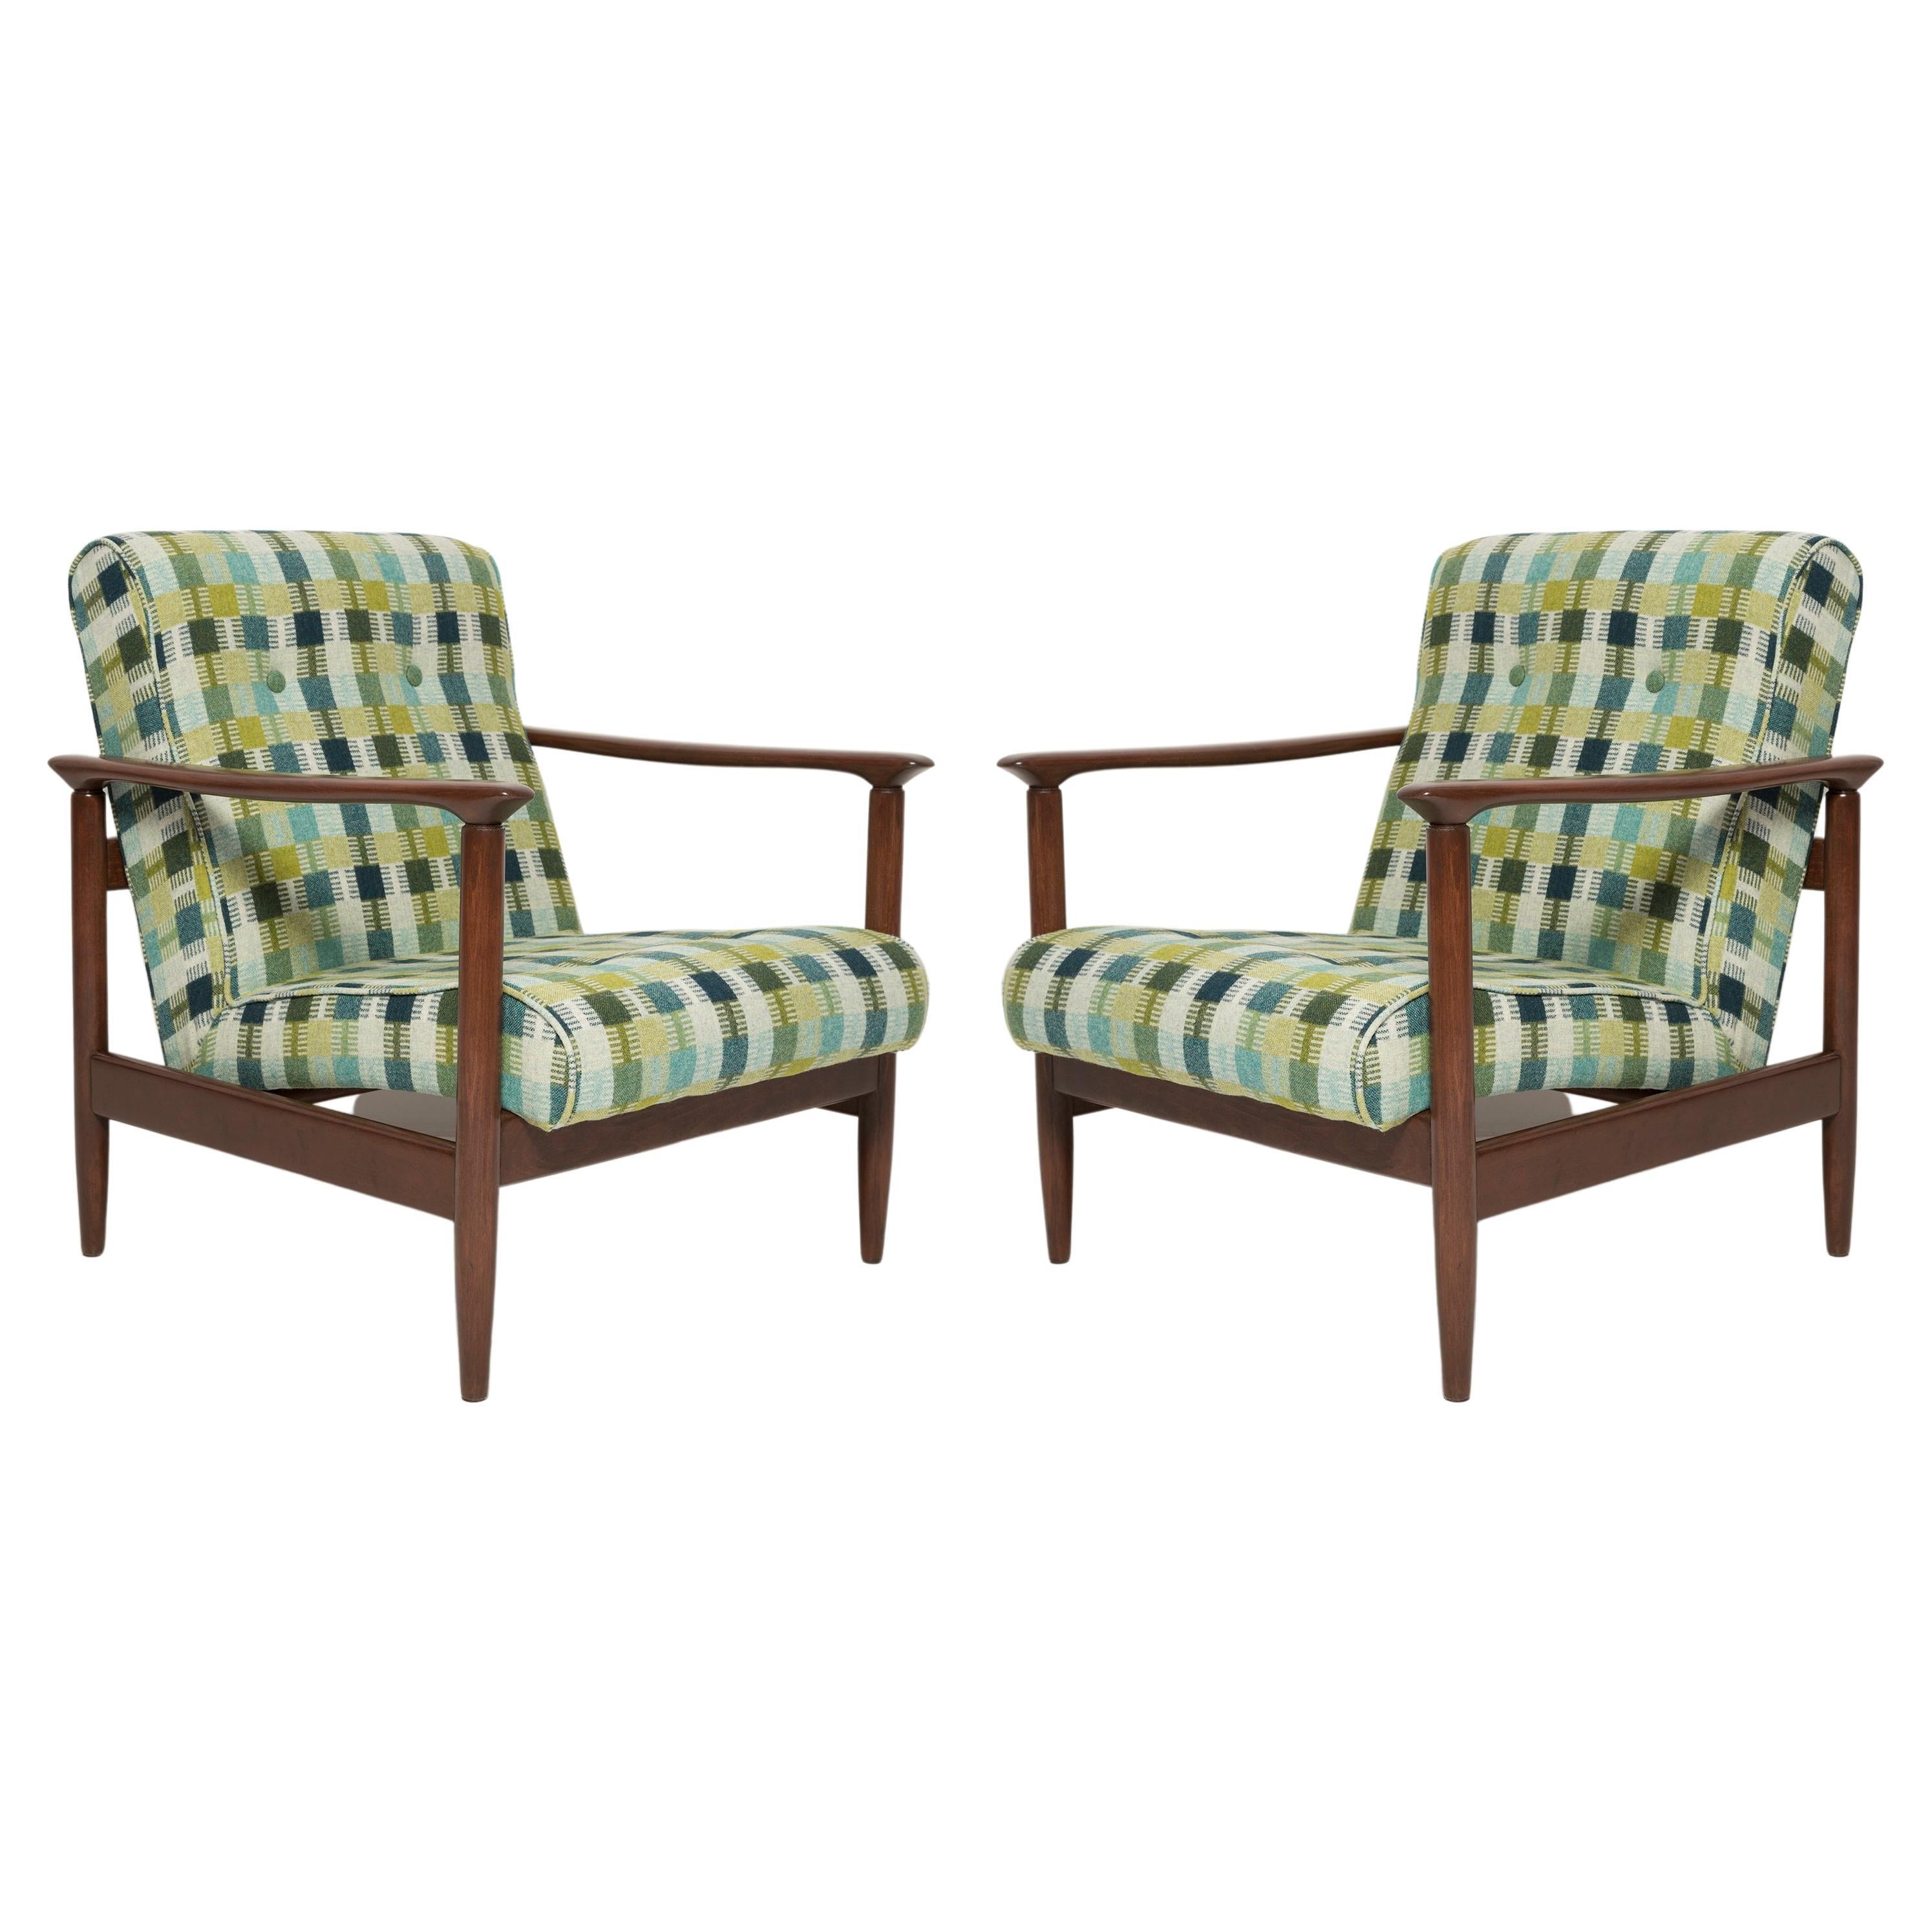 Pair of Mid-Century Green Wool Armchairs, GFM 142, Edmund Homa, Europe, 1960s For Sale